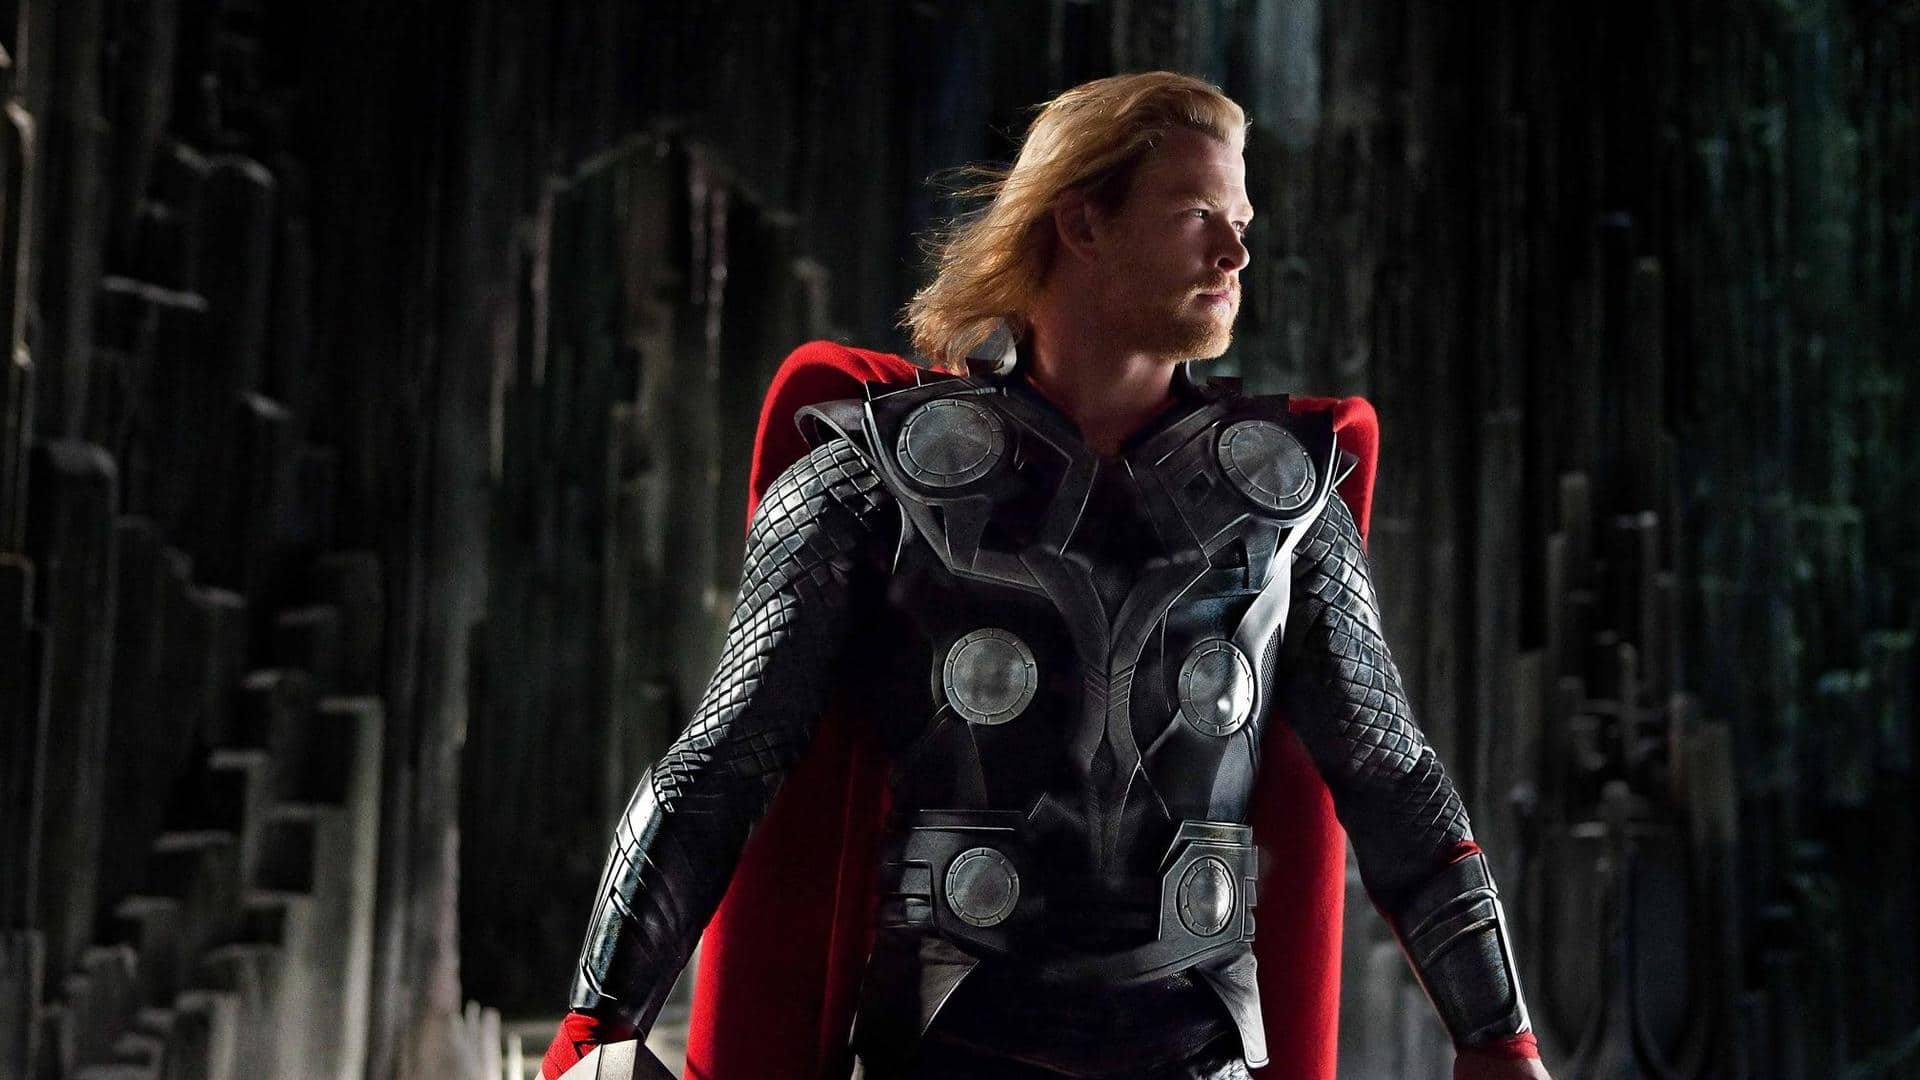 We'd probably close book: Chris Hemsworth on Thor's MCU conclusion